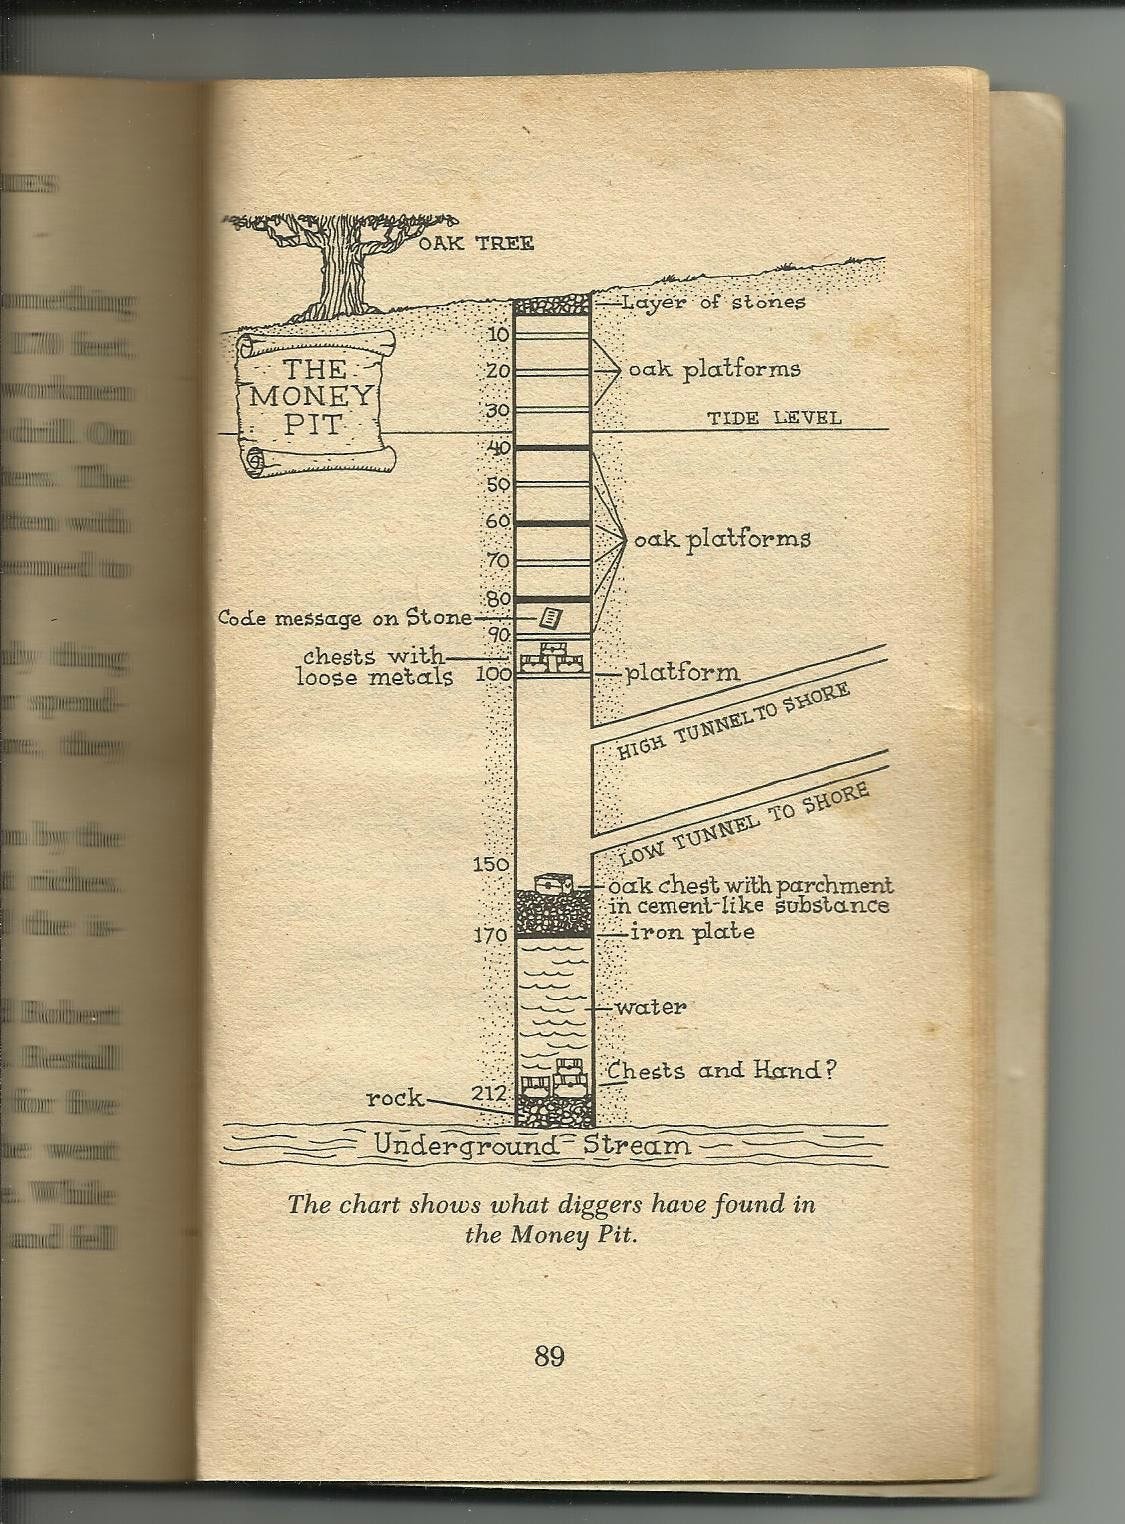 Page of a book showing a diagram labeled "The Money Pit", showing a deep pit broken up in levels 10,20,30, etc. At various levels are noted what was allegedly found 